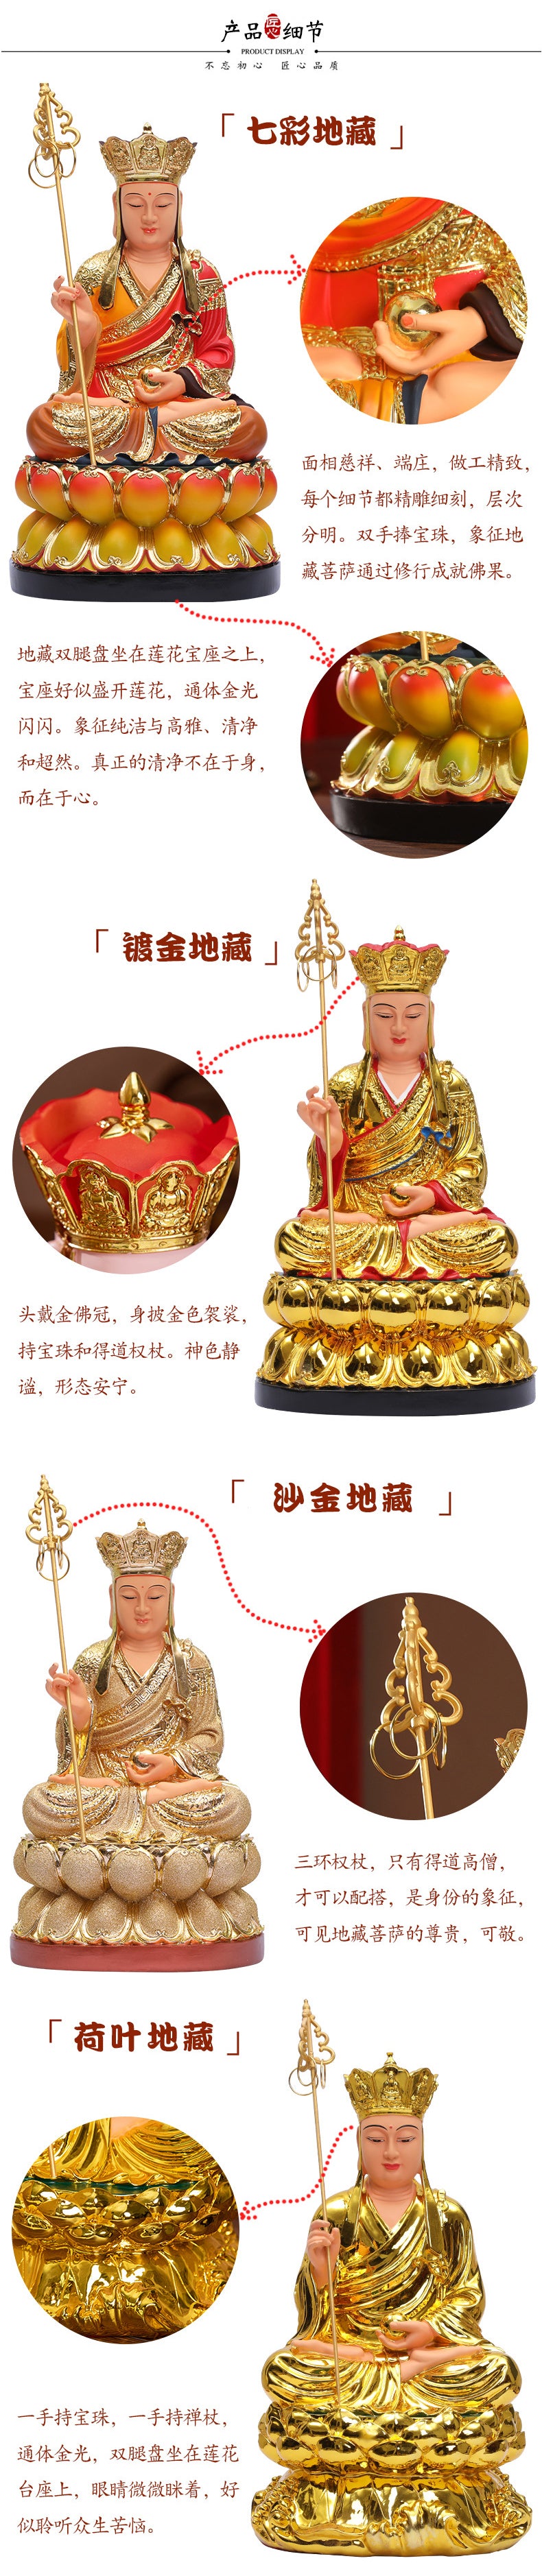 Earth Treasury, Buddha ksitigarbha Statue for Sale, Sand Gold Resin Material, Offerings Product Detail Statement-2